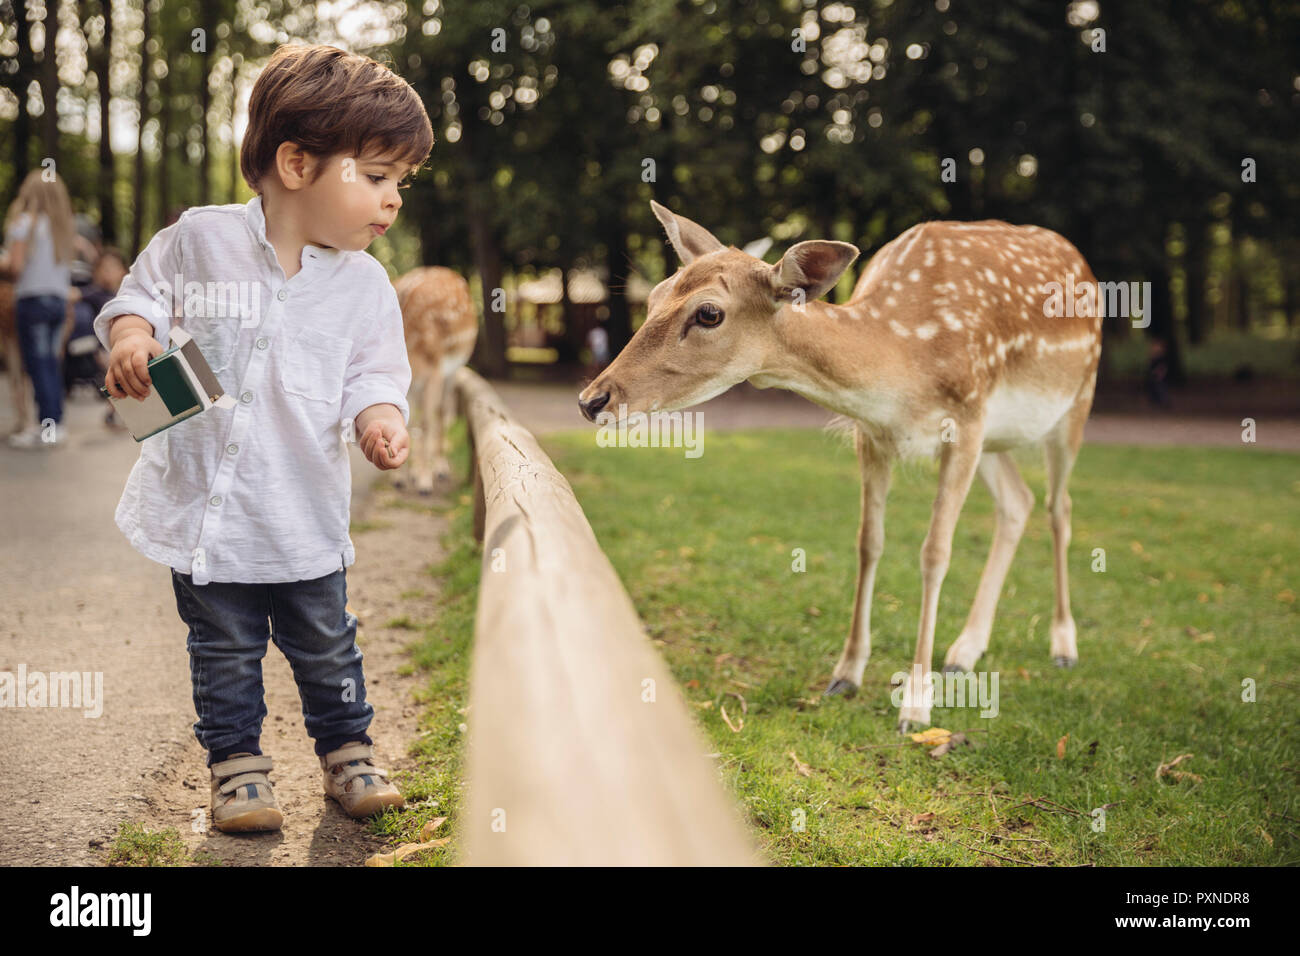 Toddler feeding roe deer in a wild park Stock Photo